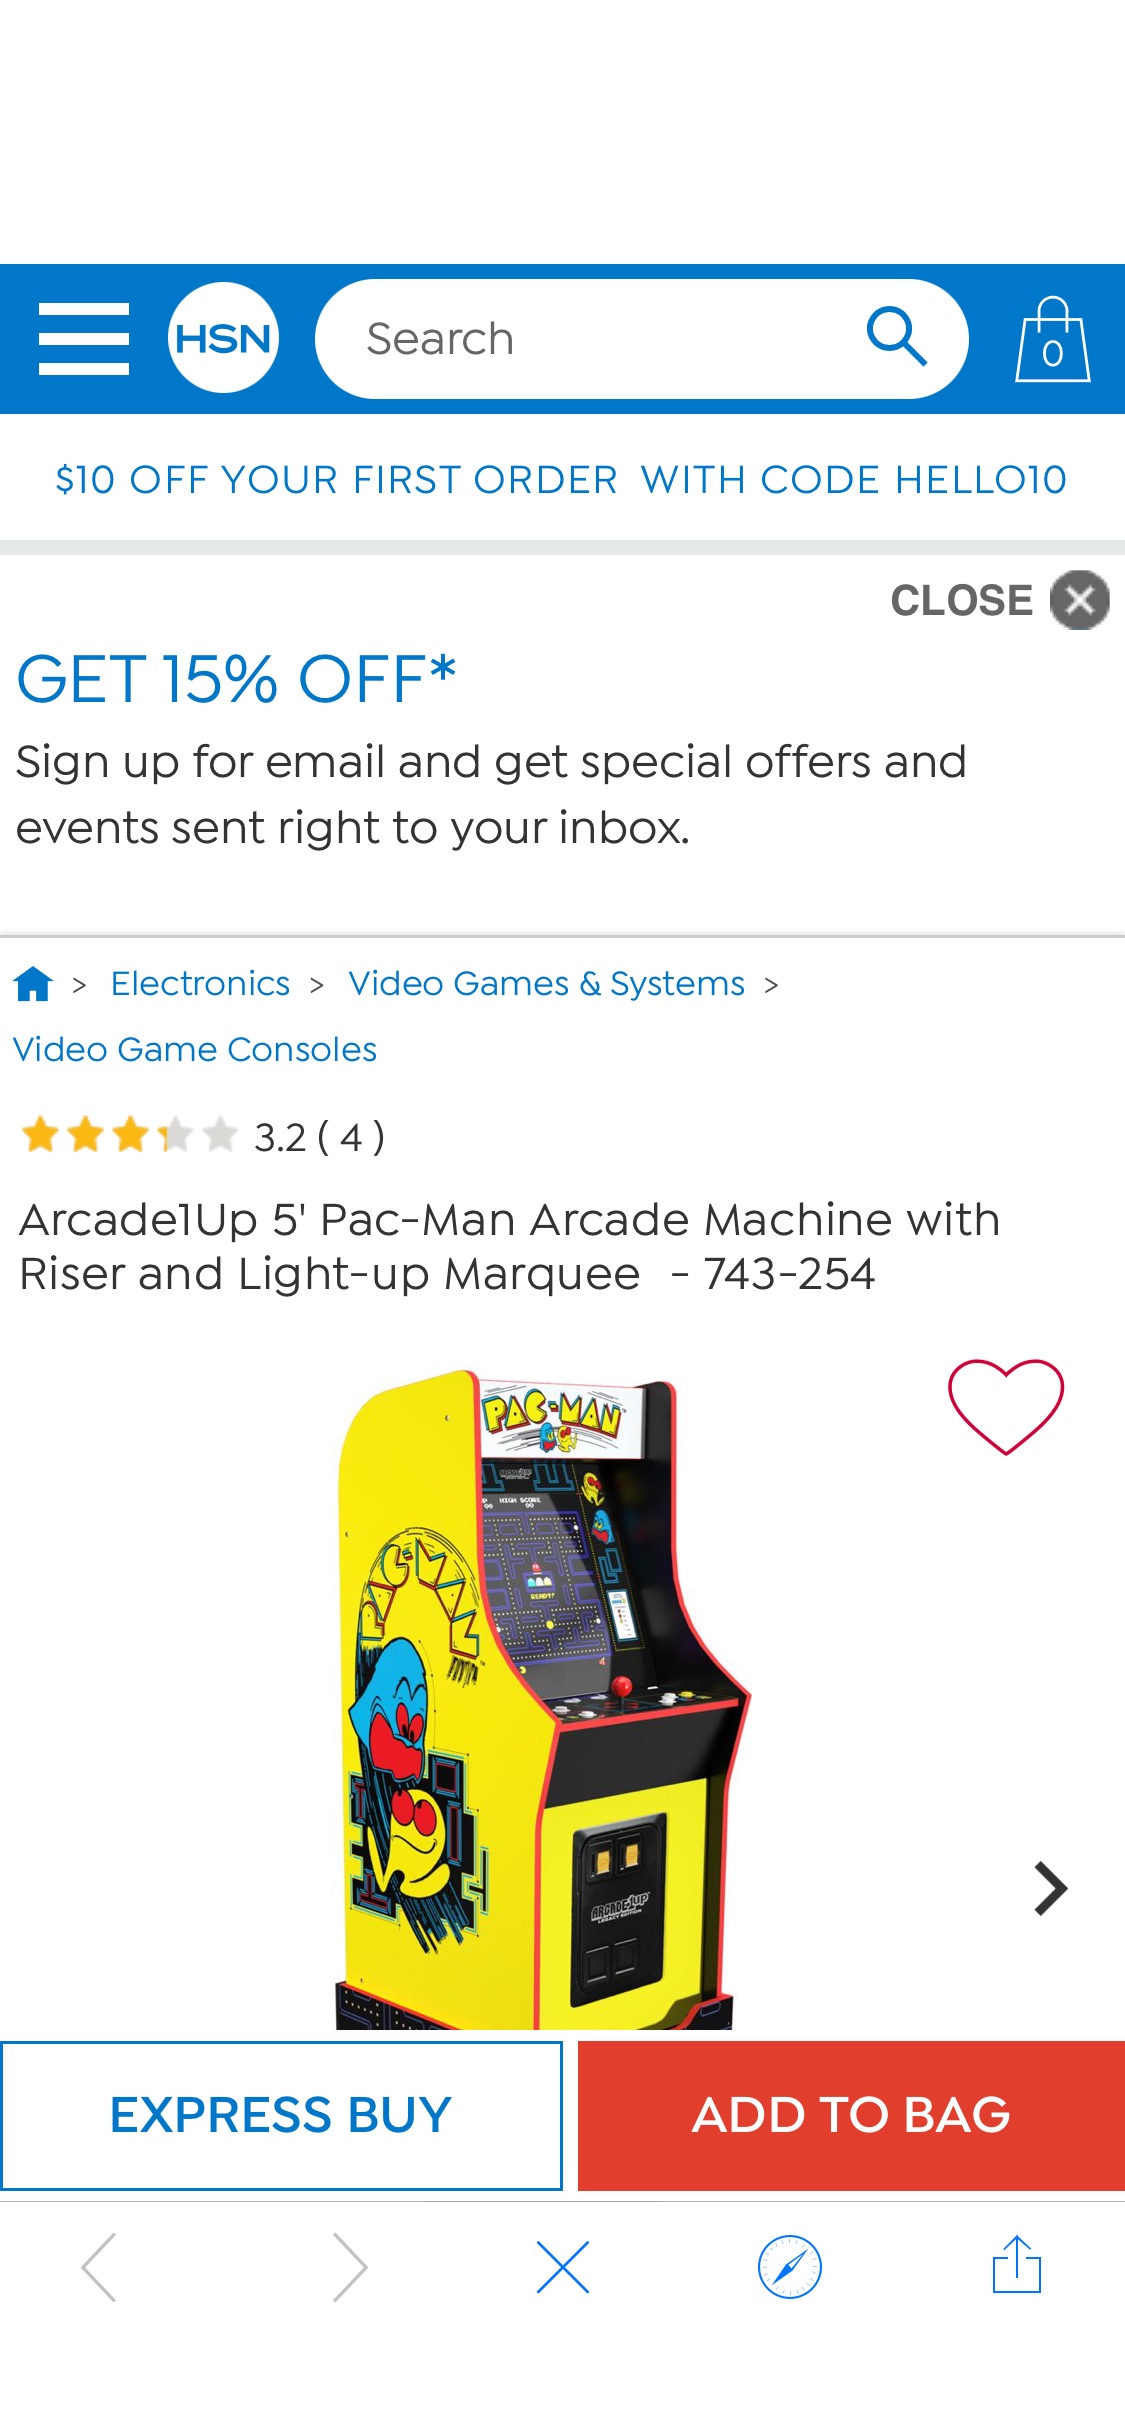 Arcade1Up 5' Pac-Man Arcade Machine with Riser and Light-up Marquee - 9863506 | HSN为